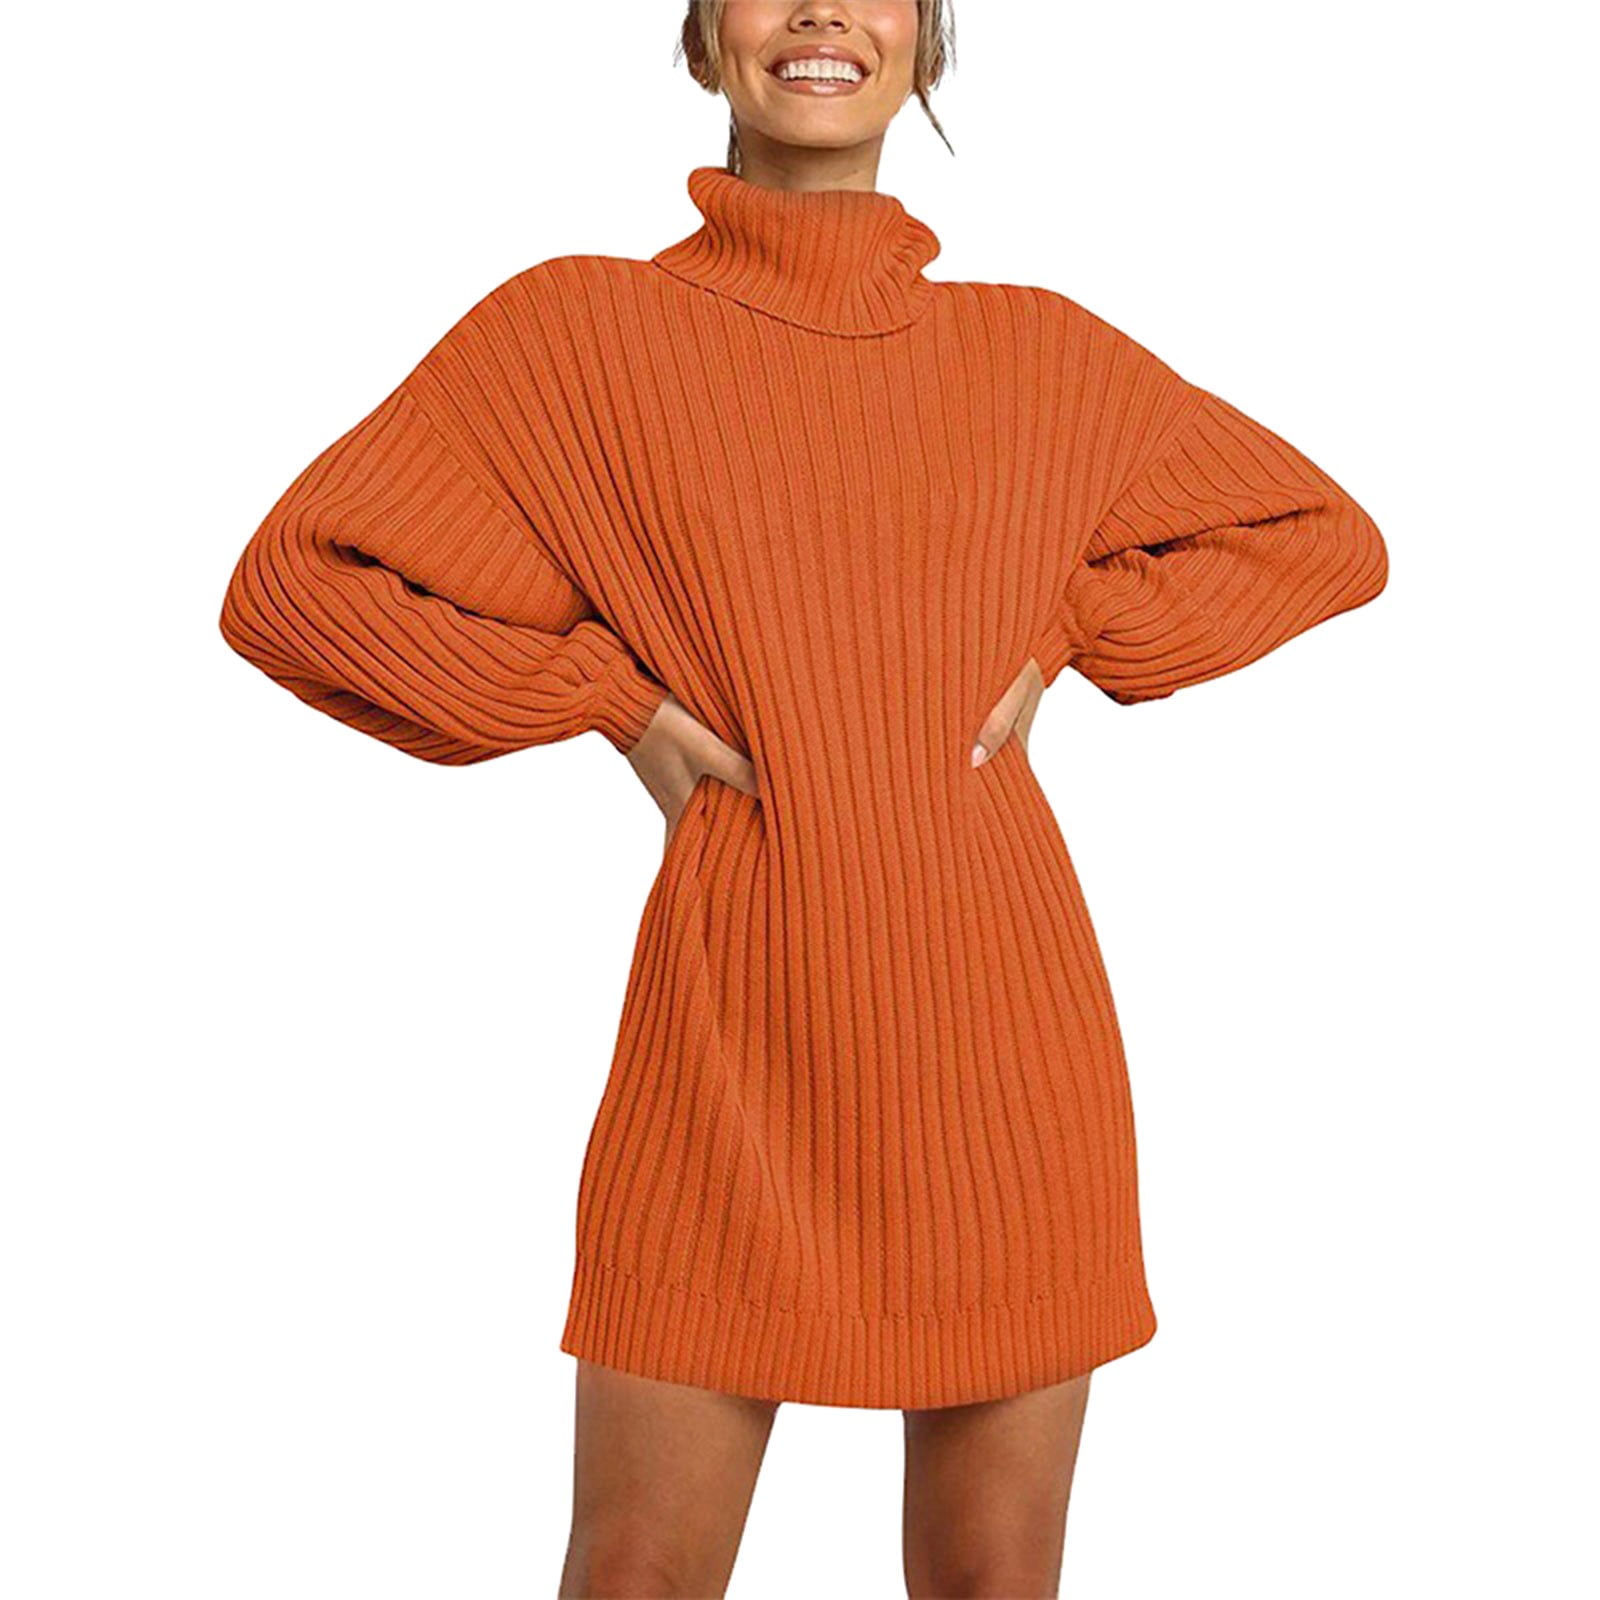 Sweater Dresses for Women with Sleeves Women Sweaters for Leggings